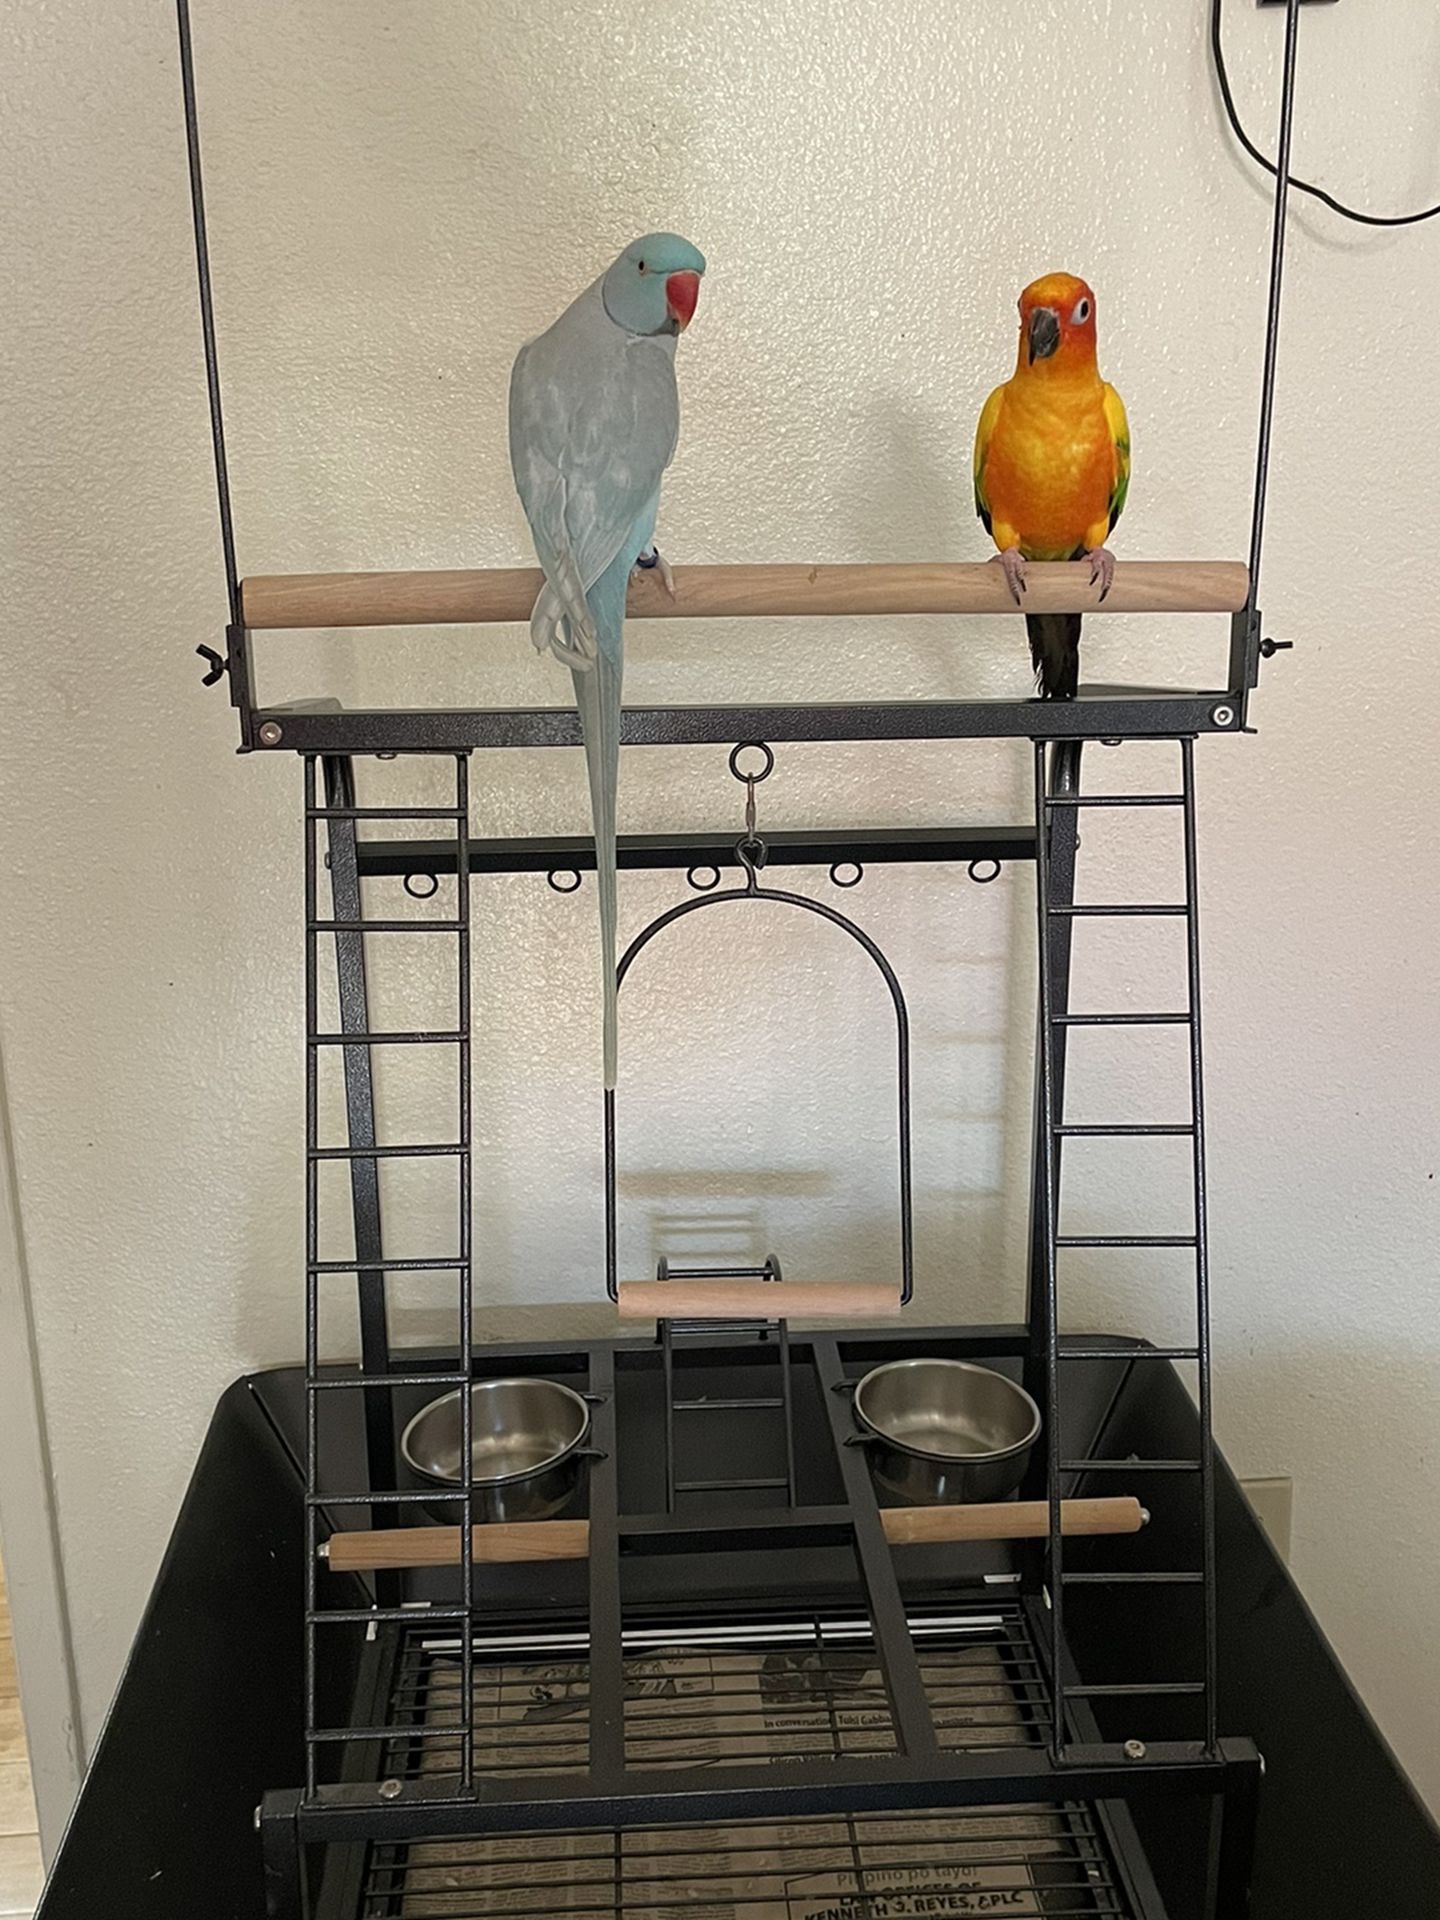 Parrot Playstand/ Bird Cage